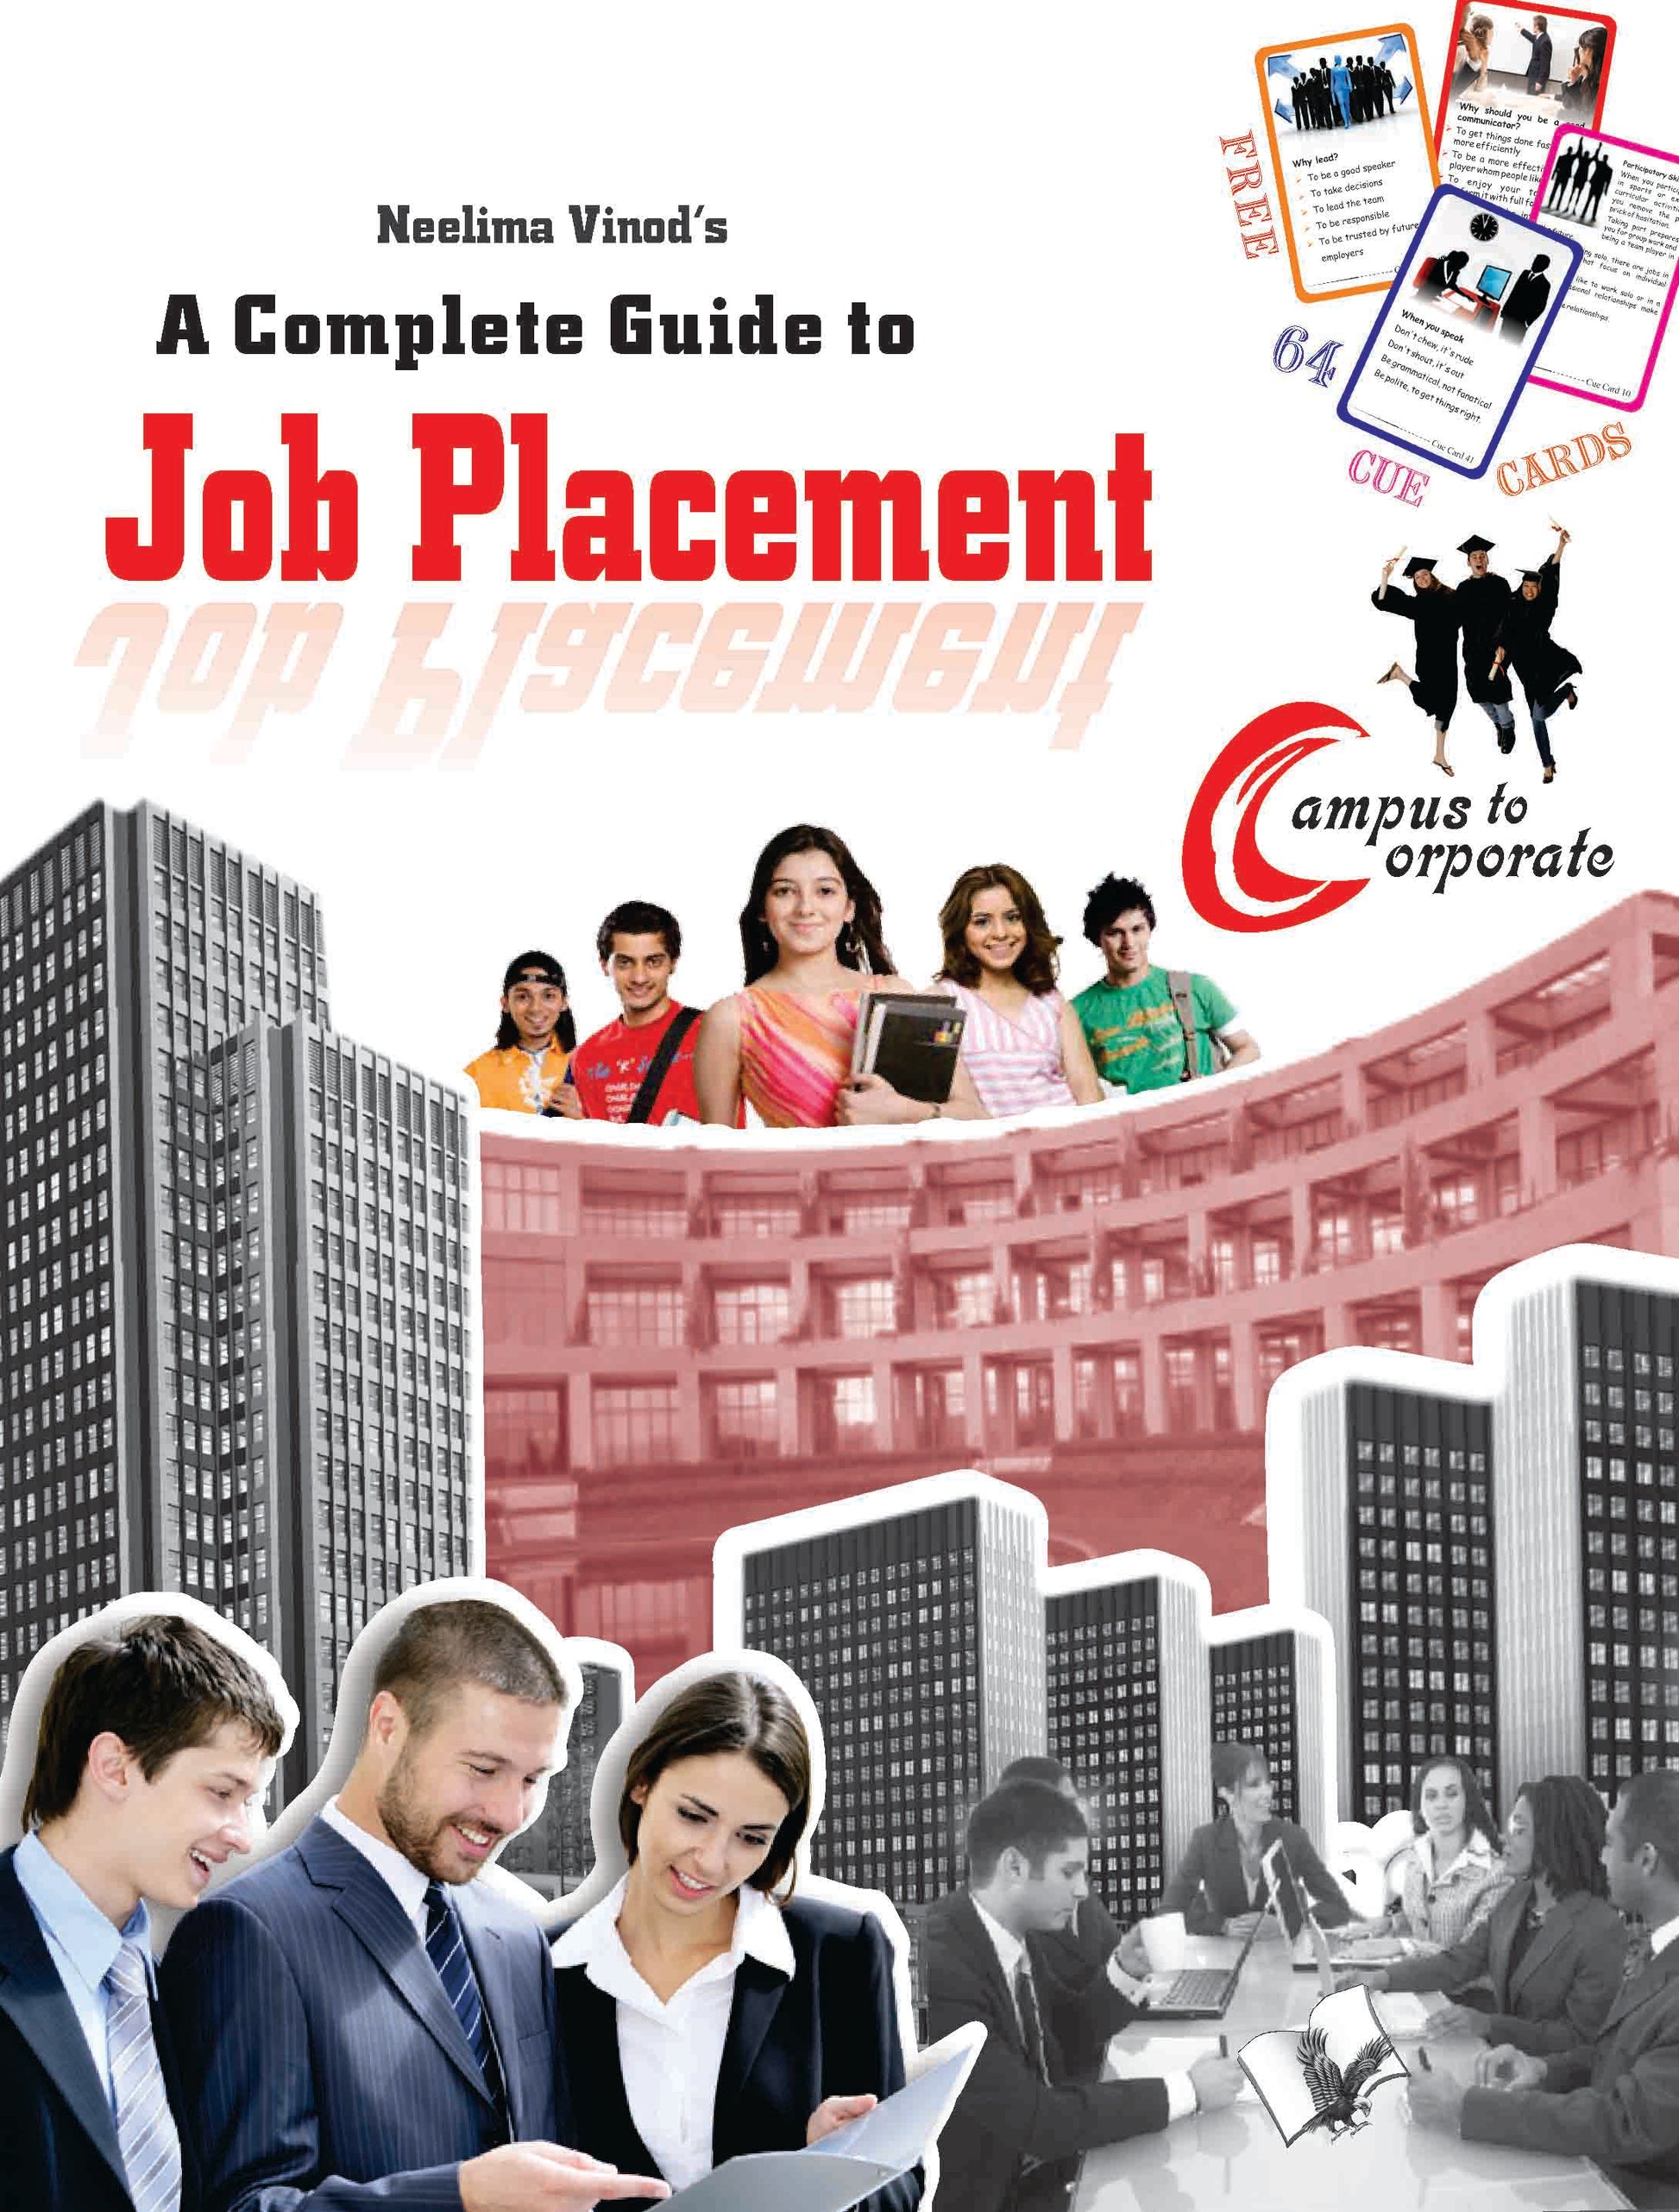 A Complete Guide To Job Placement(Free Cue Cards)